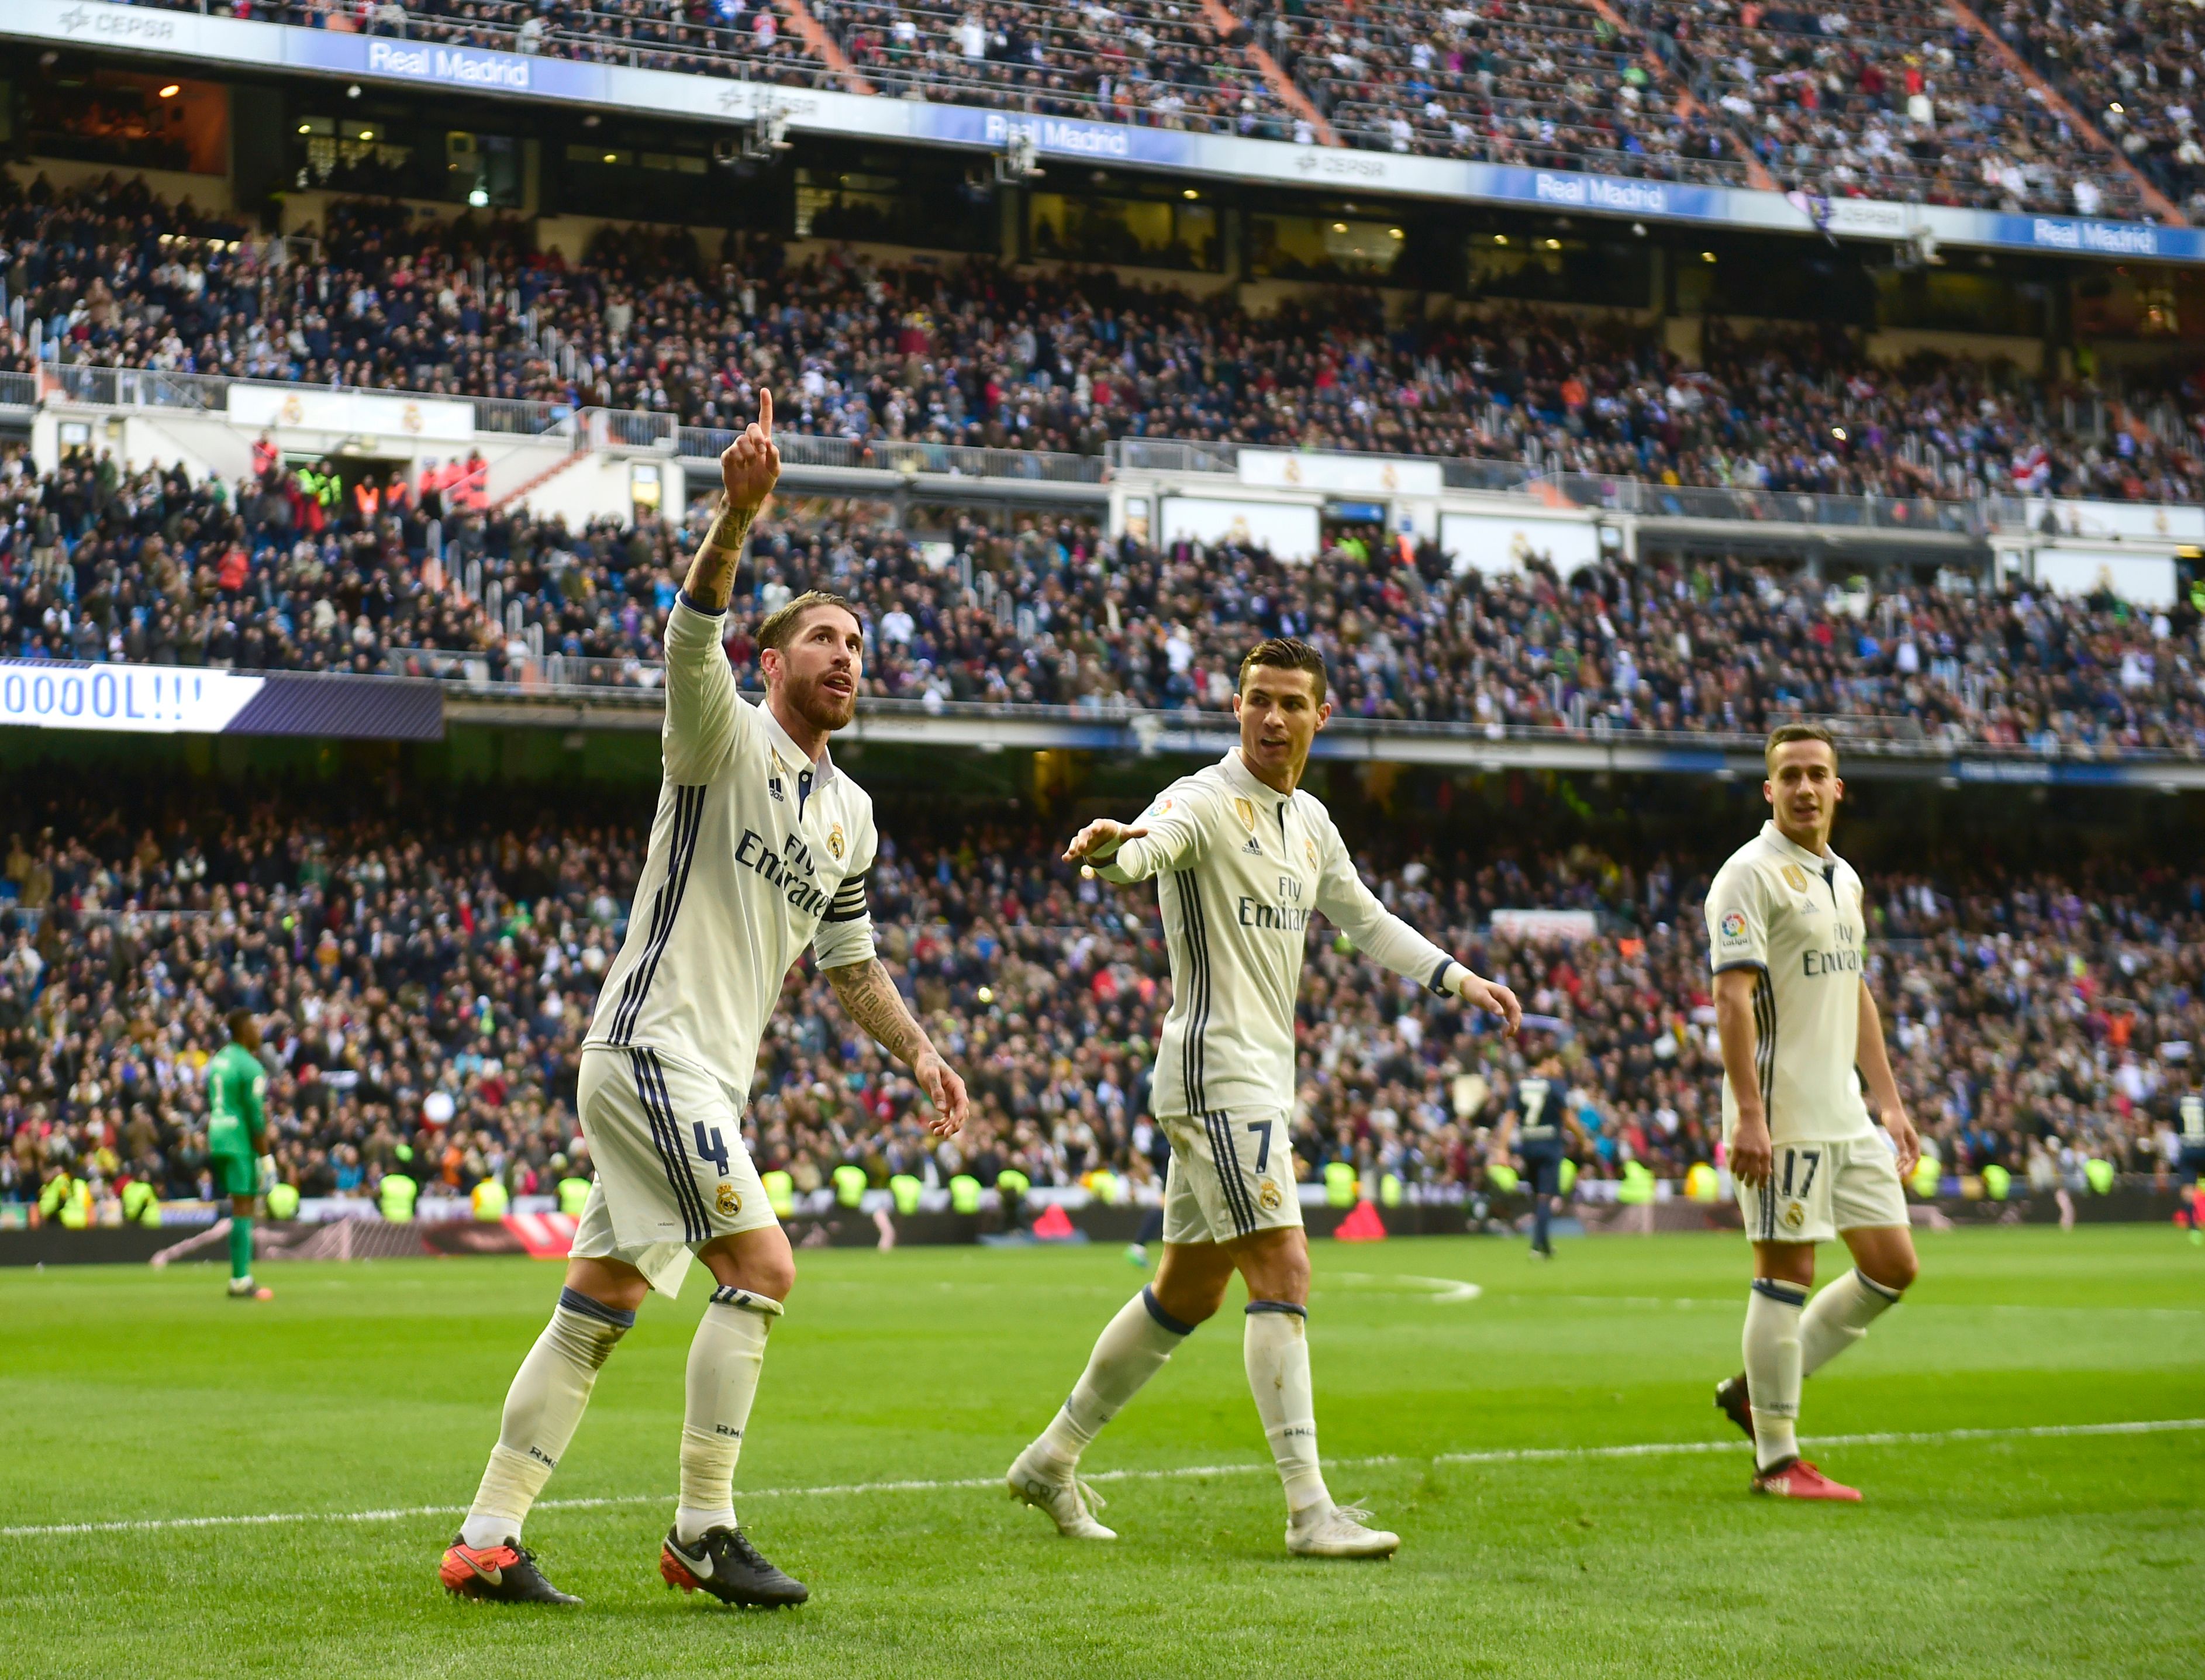 Real Madrid's defender Sergio Ramos (L) celebrates after scoring during the Spanish league football match Real Madrid CF vs Malaga CF at the Santiago Bernabeu stadium in Madrid on January 21, 2017. / AFP / PIERRE-PHILIPPE MARCOU        (Photo credit should read PIERRE-PHILIPPE MARCOU/AFP/Getty Images)